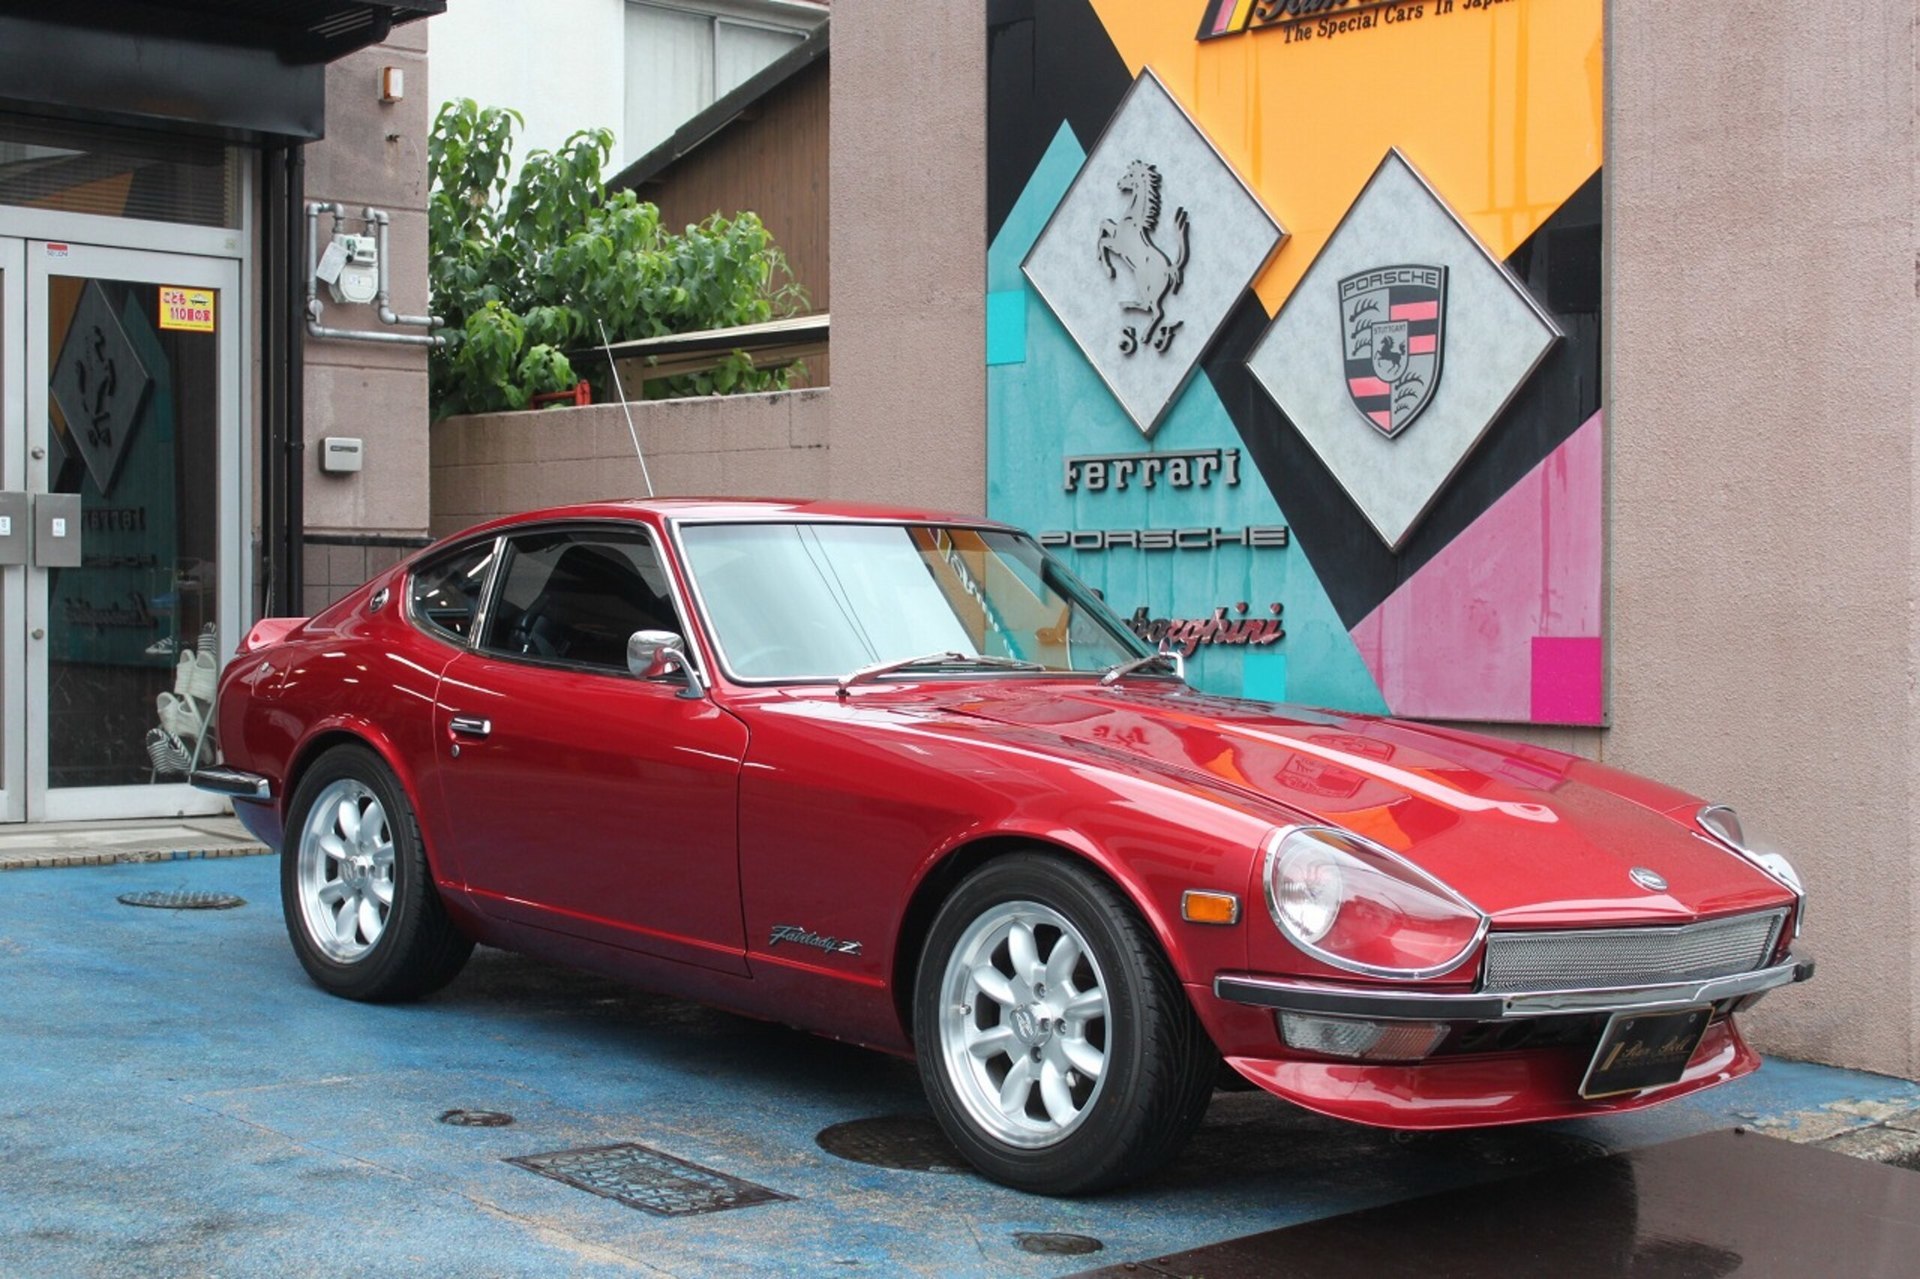 Fairlady Z S30 240z 5mt 2 8kai 3 1l Turbo Engine Controled By Motec 日産 フェアレディs30 240z 2 8改3 1lターボe G Motec制御 ワインレッド 車両本体価格 850 0万円 日産車中古車紹介 Jdm Nissan Used Car